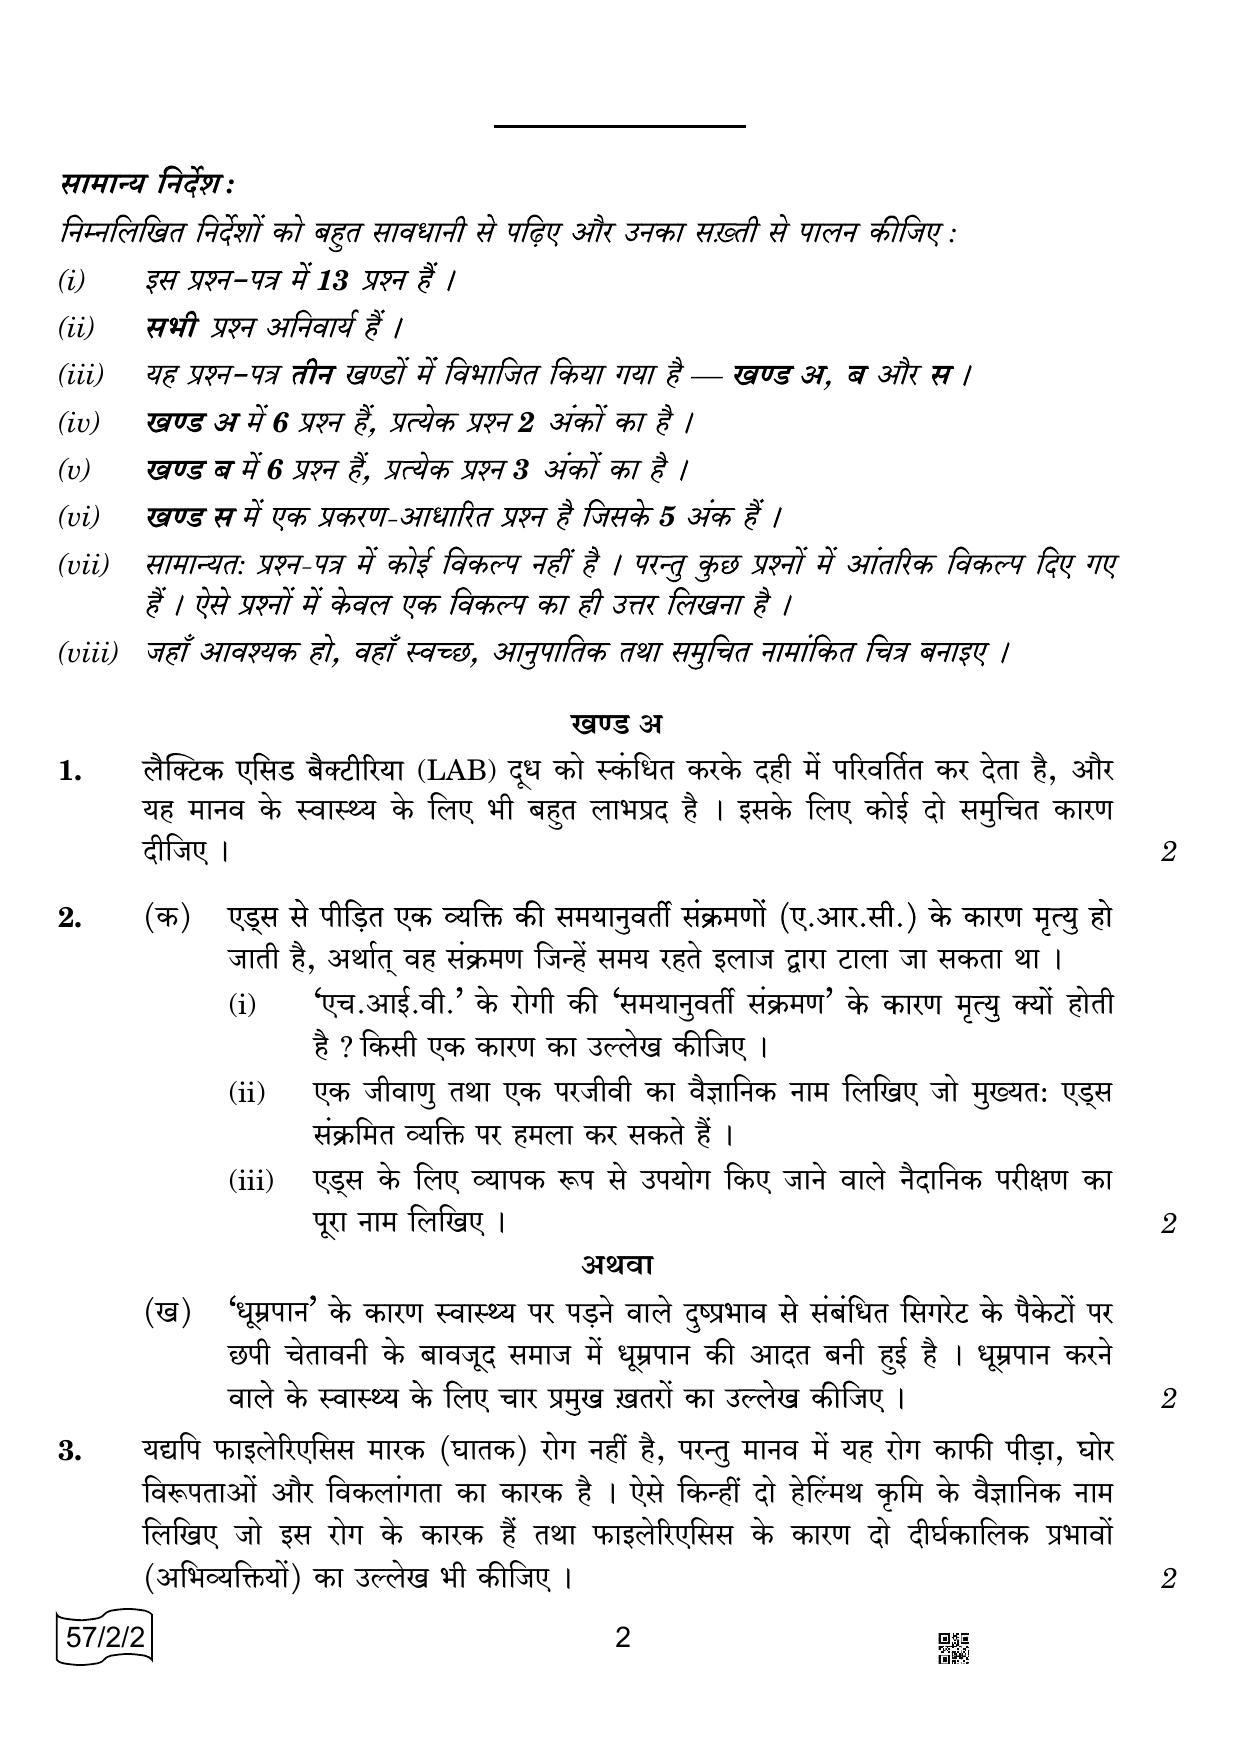 CBSE Class 12 57-2-2 Biology 2022 Question Paper - Page 2